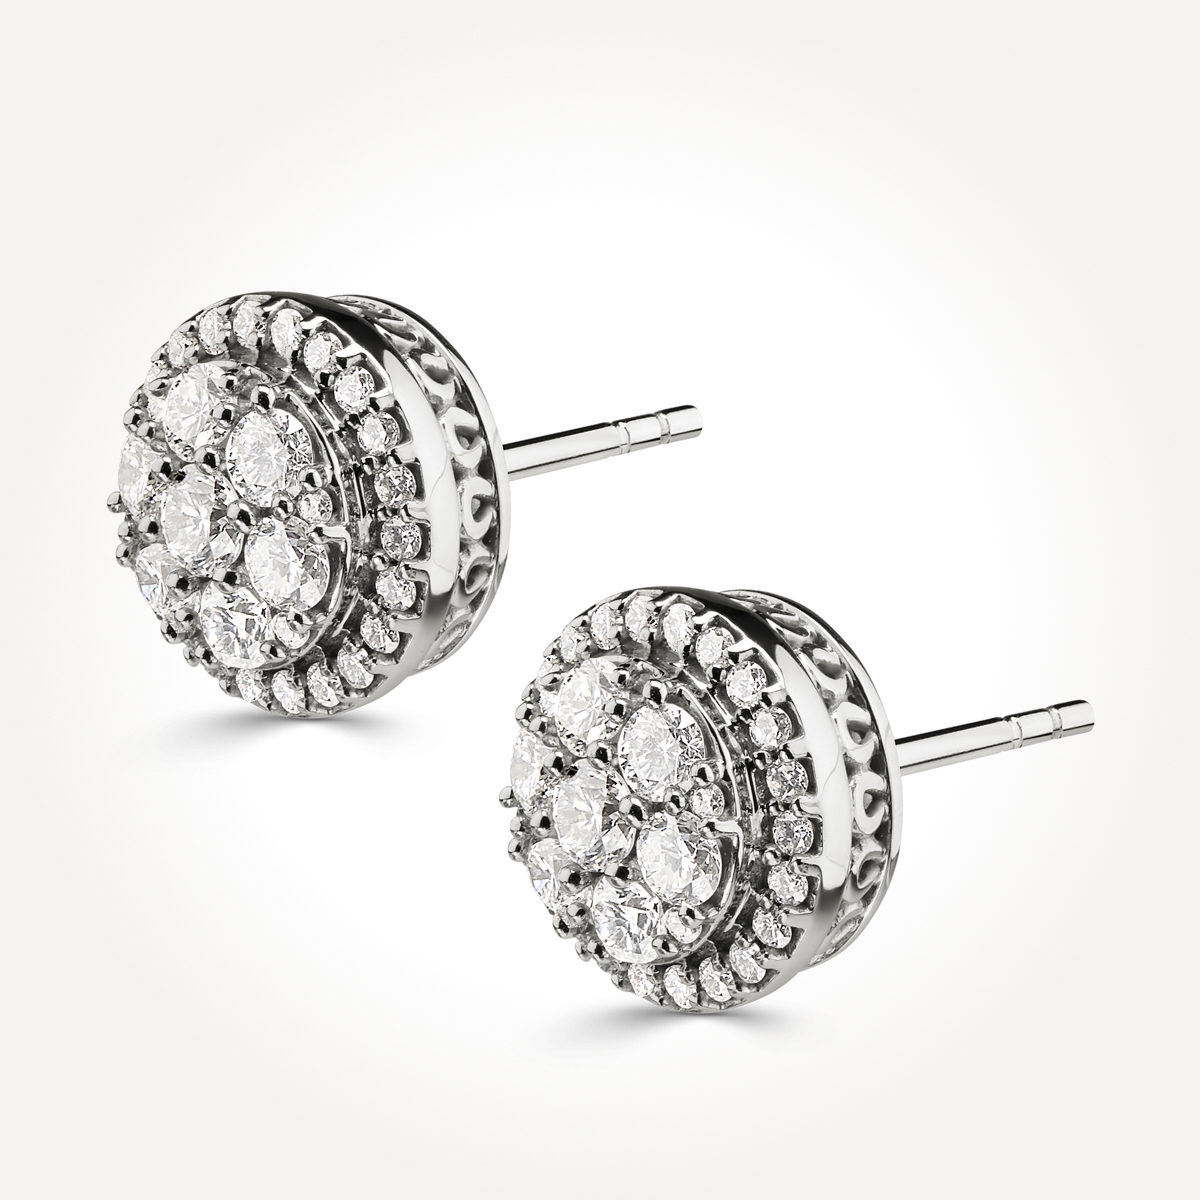 14KT White Gold Round Diamond Cluster Stud Earrings 1.00 CT. T.W.